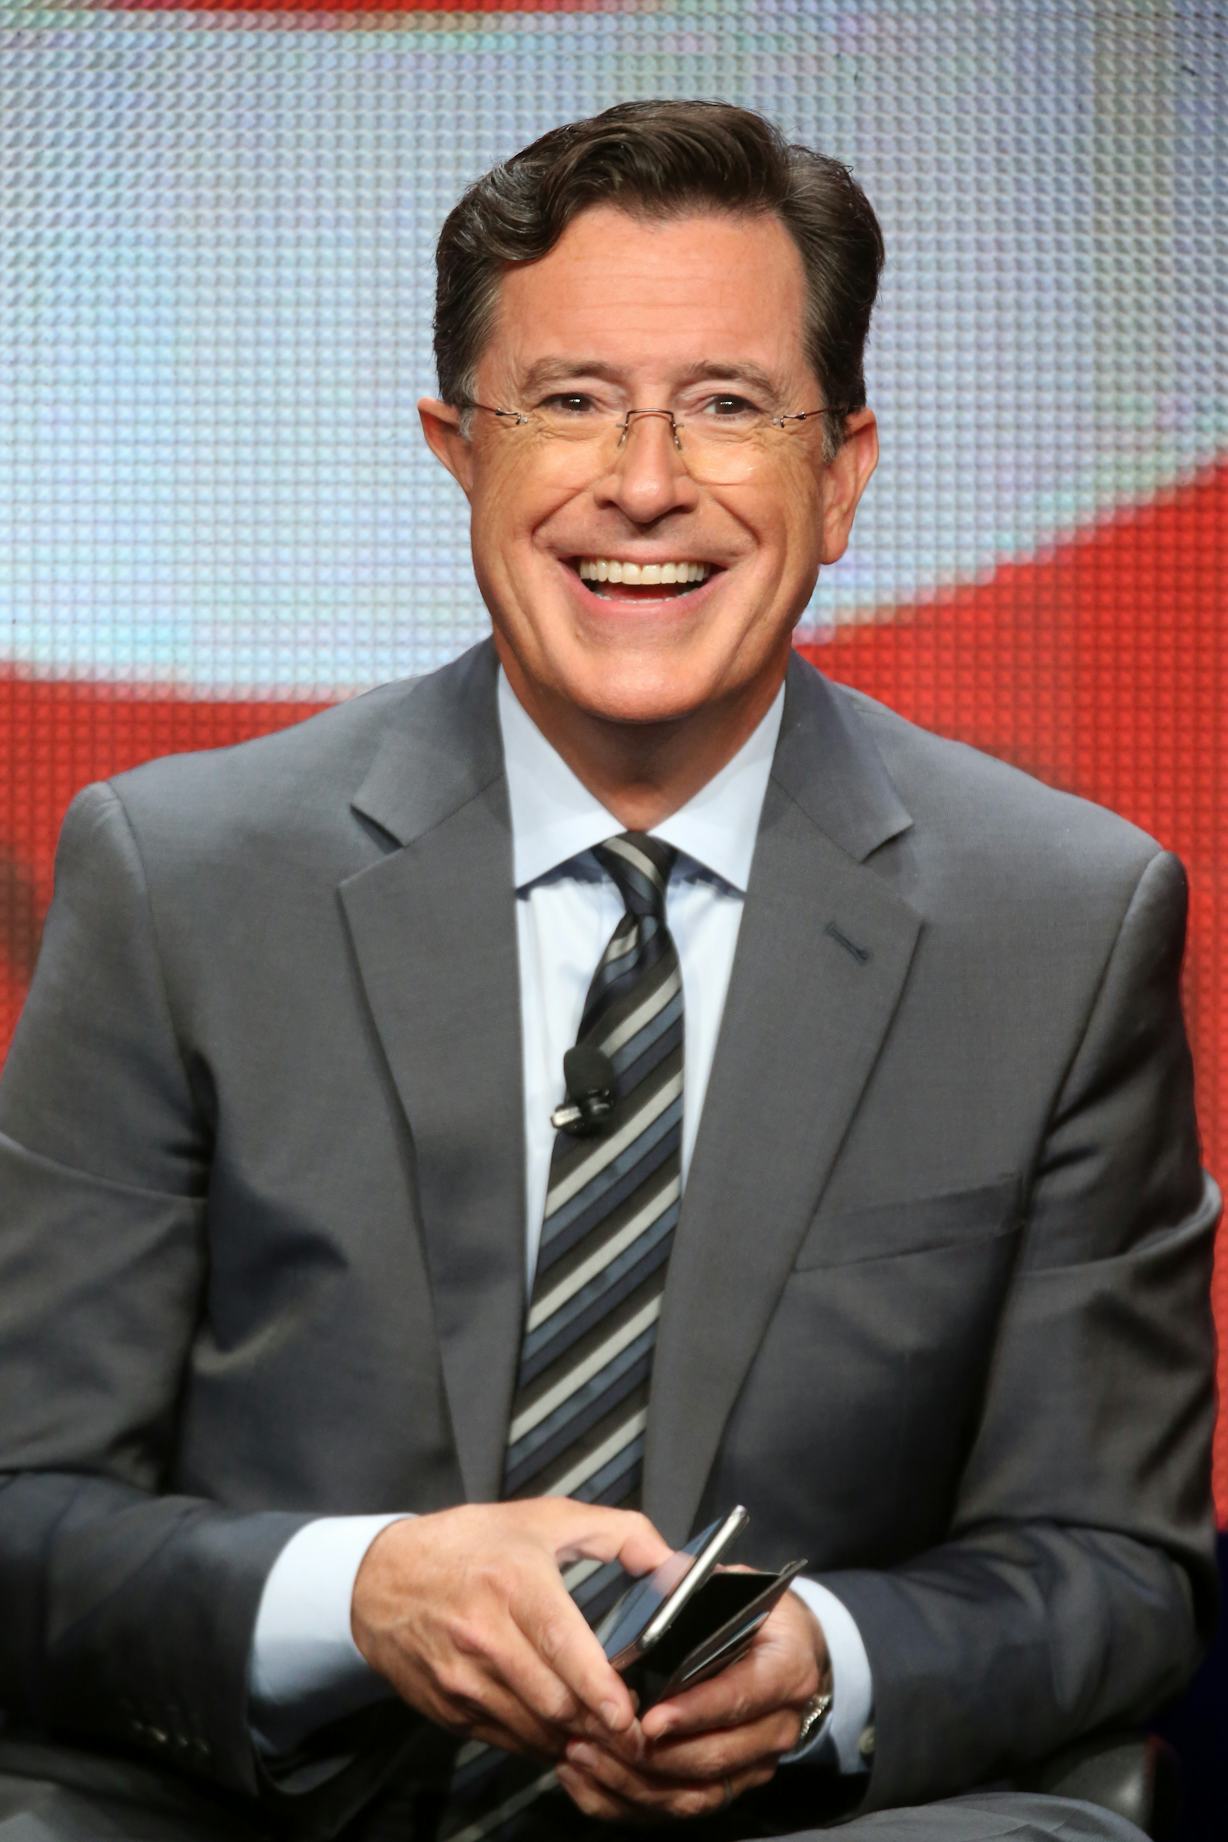 Stephen Colbert Promises A Feminist 'Late Show' & That's Not His Only ...